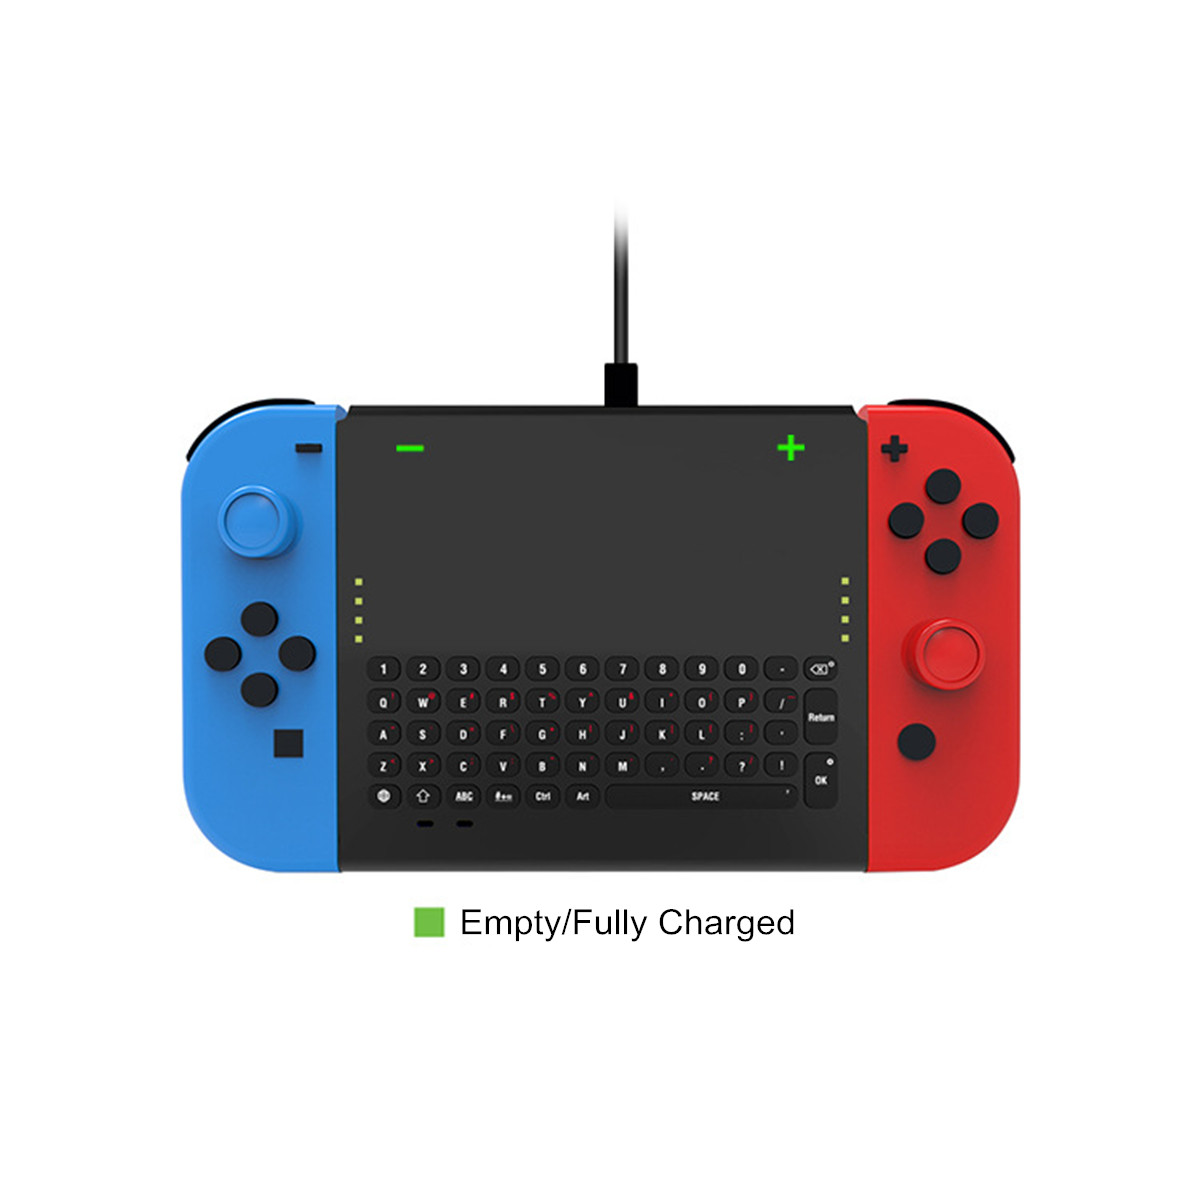 Dobe-TNS-1702-Wireless-Keyboard-24G-with-Joy-con-Holder-for-Nintendo-Switch-Game-Console-1634332